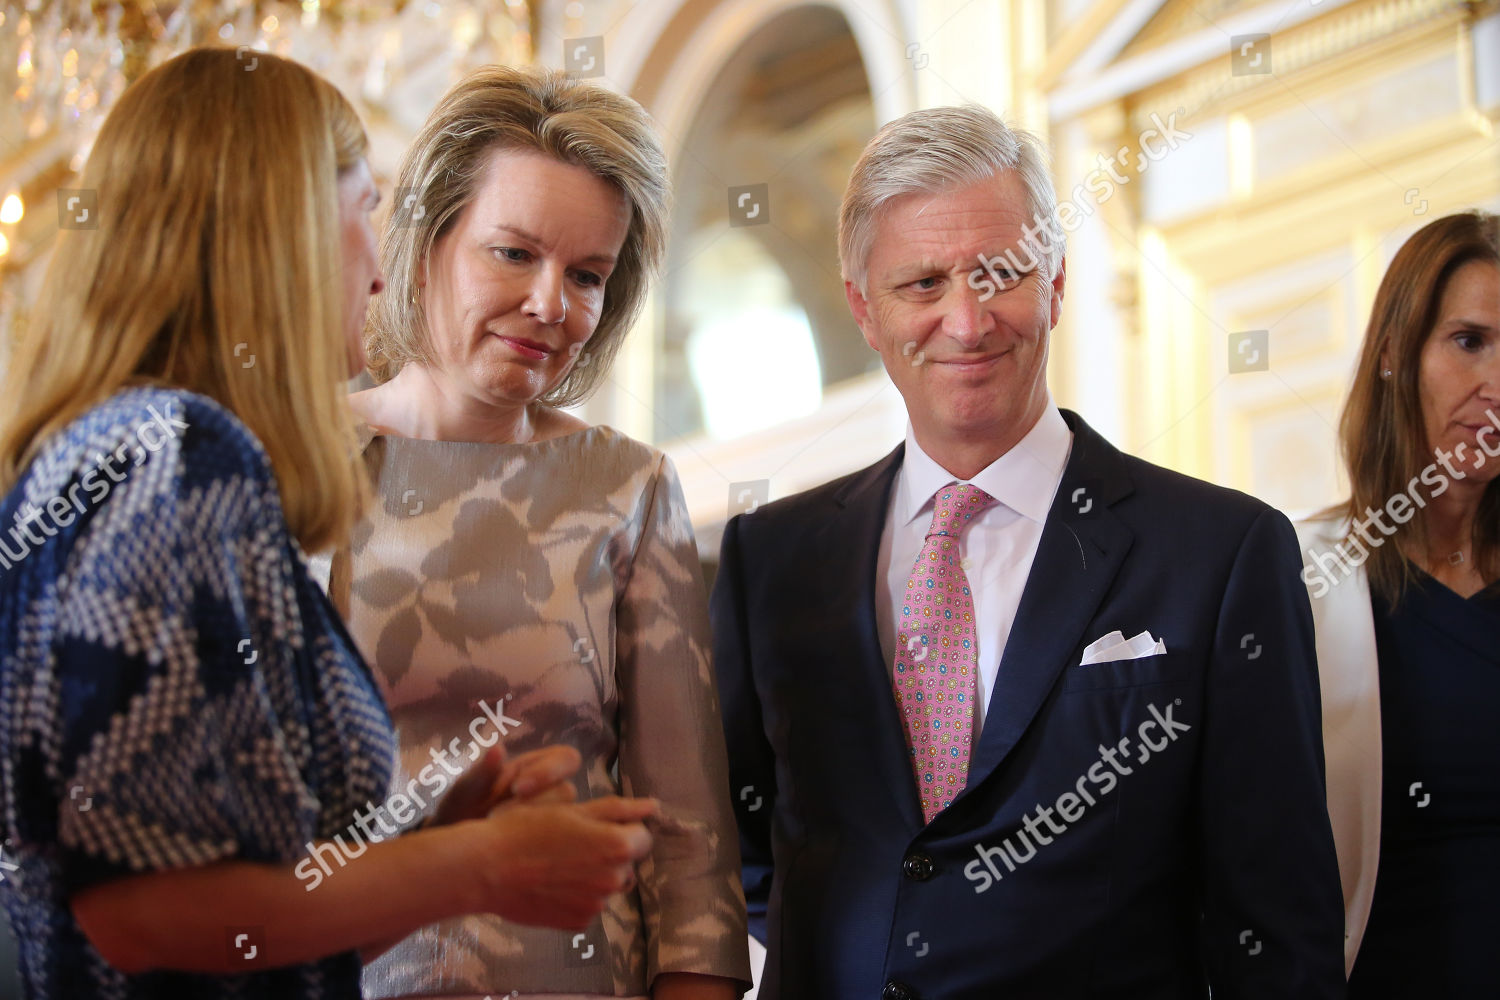 belgian-royals-summer-expo-at-the-royal-palace-brussels-belgium-shutterstock-editorial-10340779c.jpg